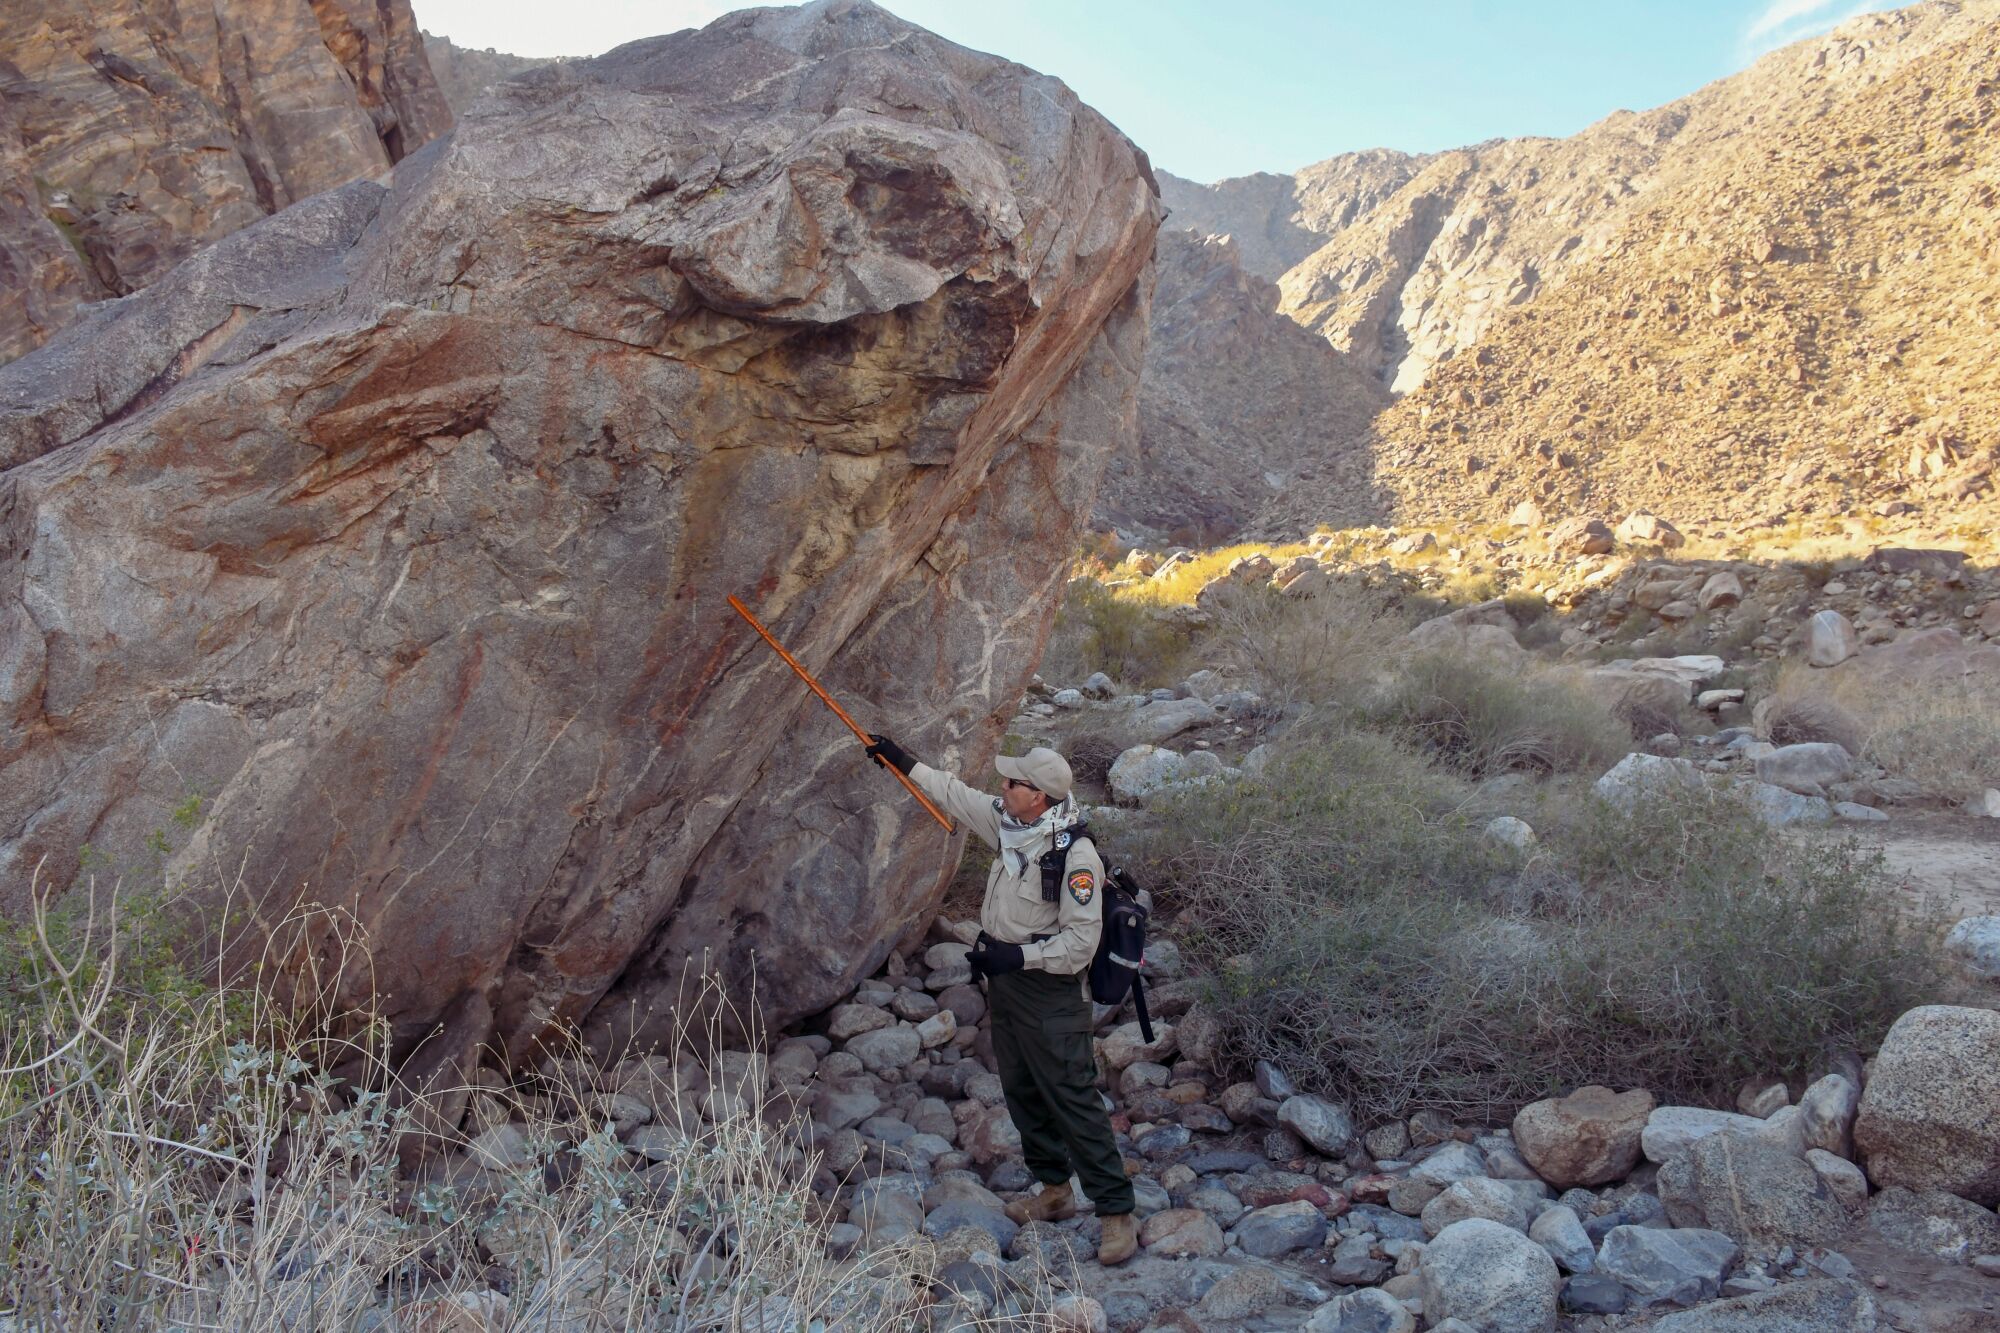 A ranger points at a large rock.